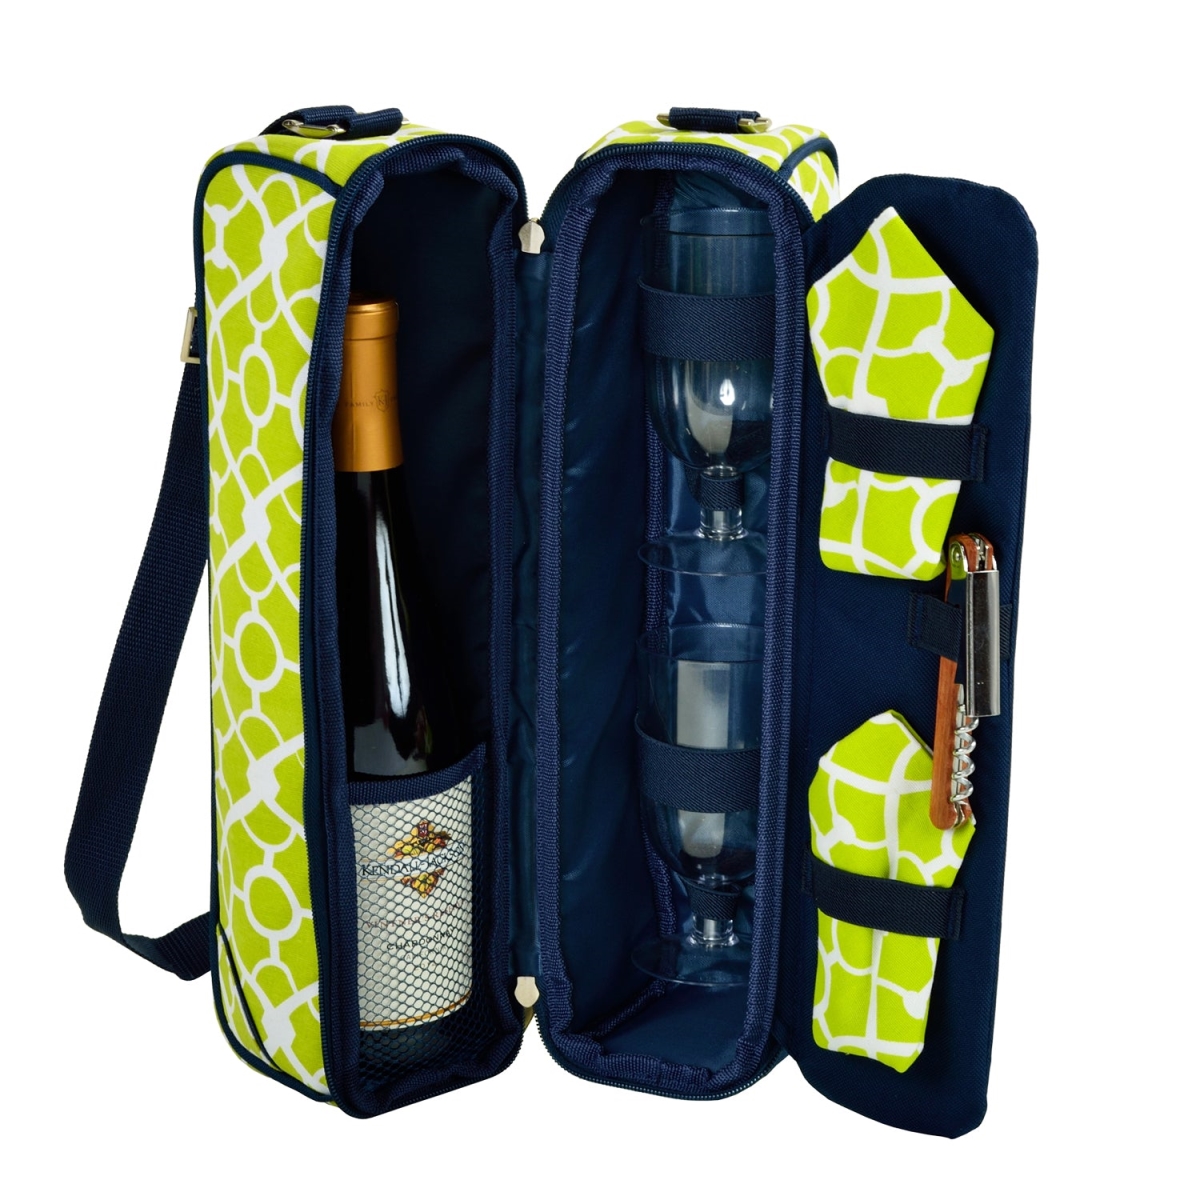 Picnic At Ascot 133-TG-PAA Picnic at Ascot Sunset Wine Carrier for 2 (133) - Trellis Green